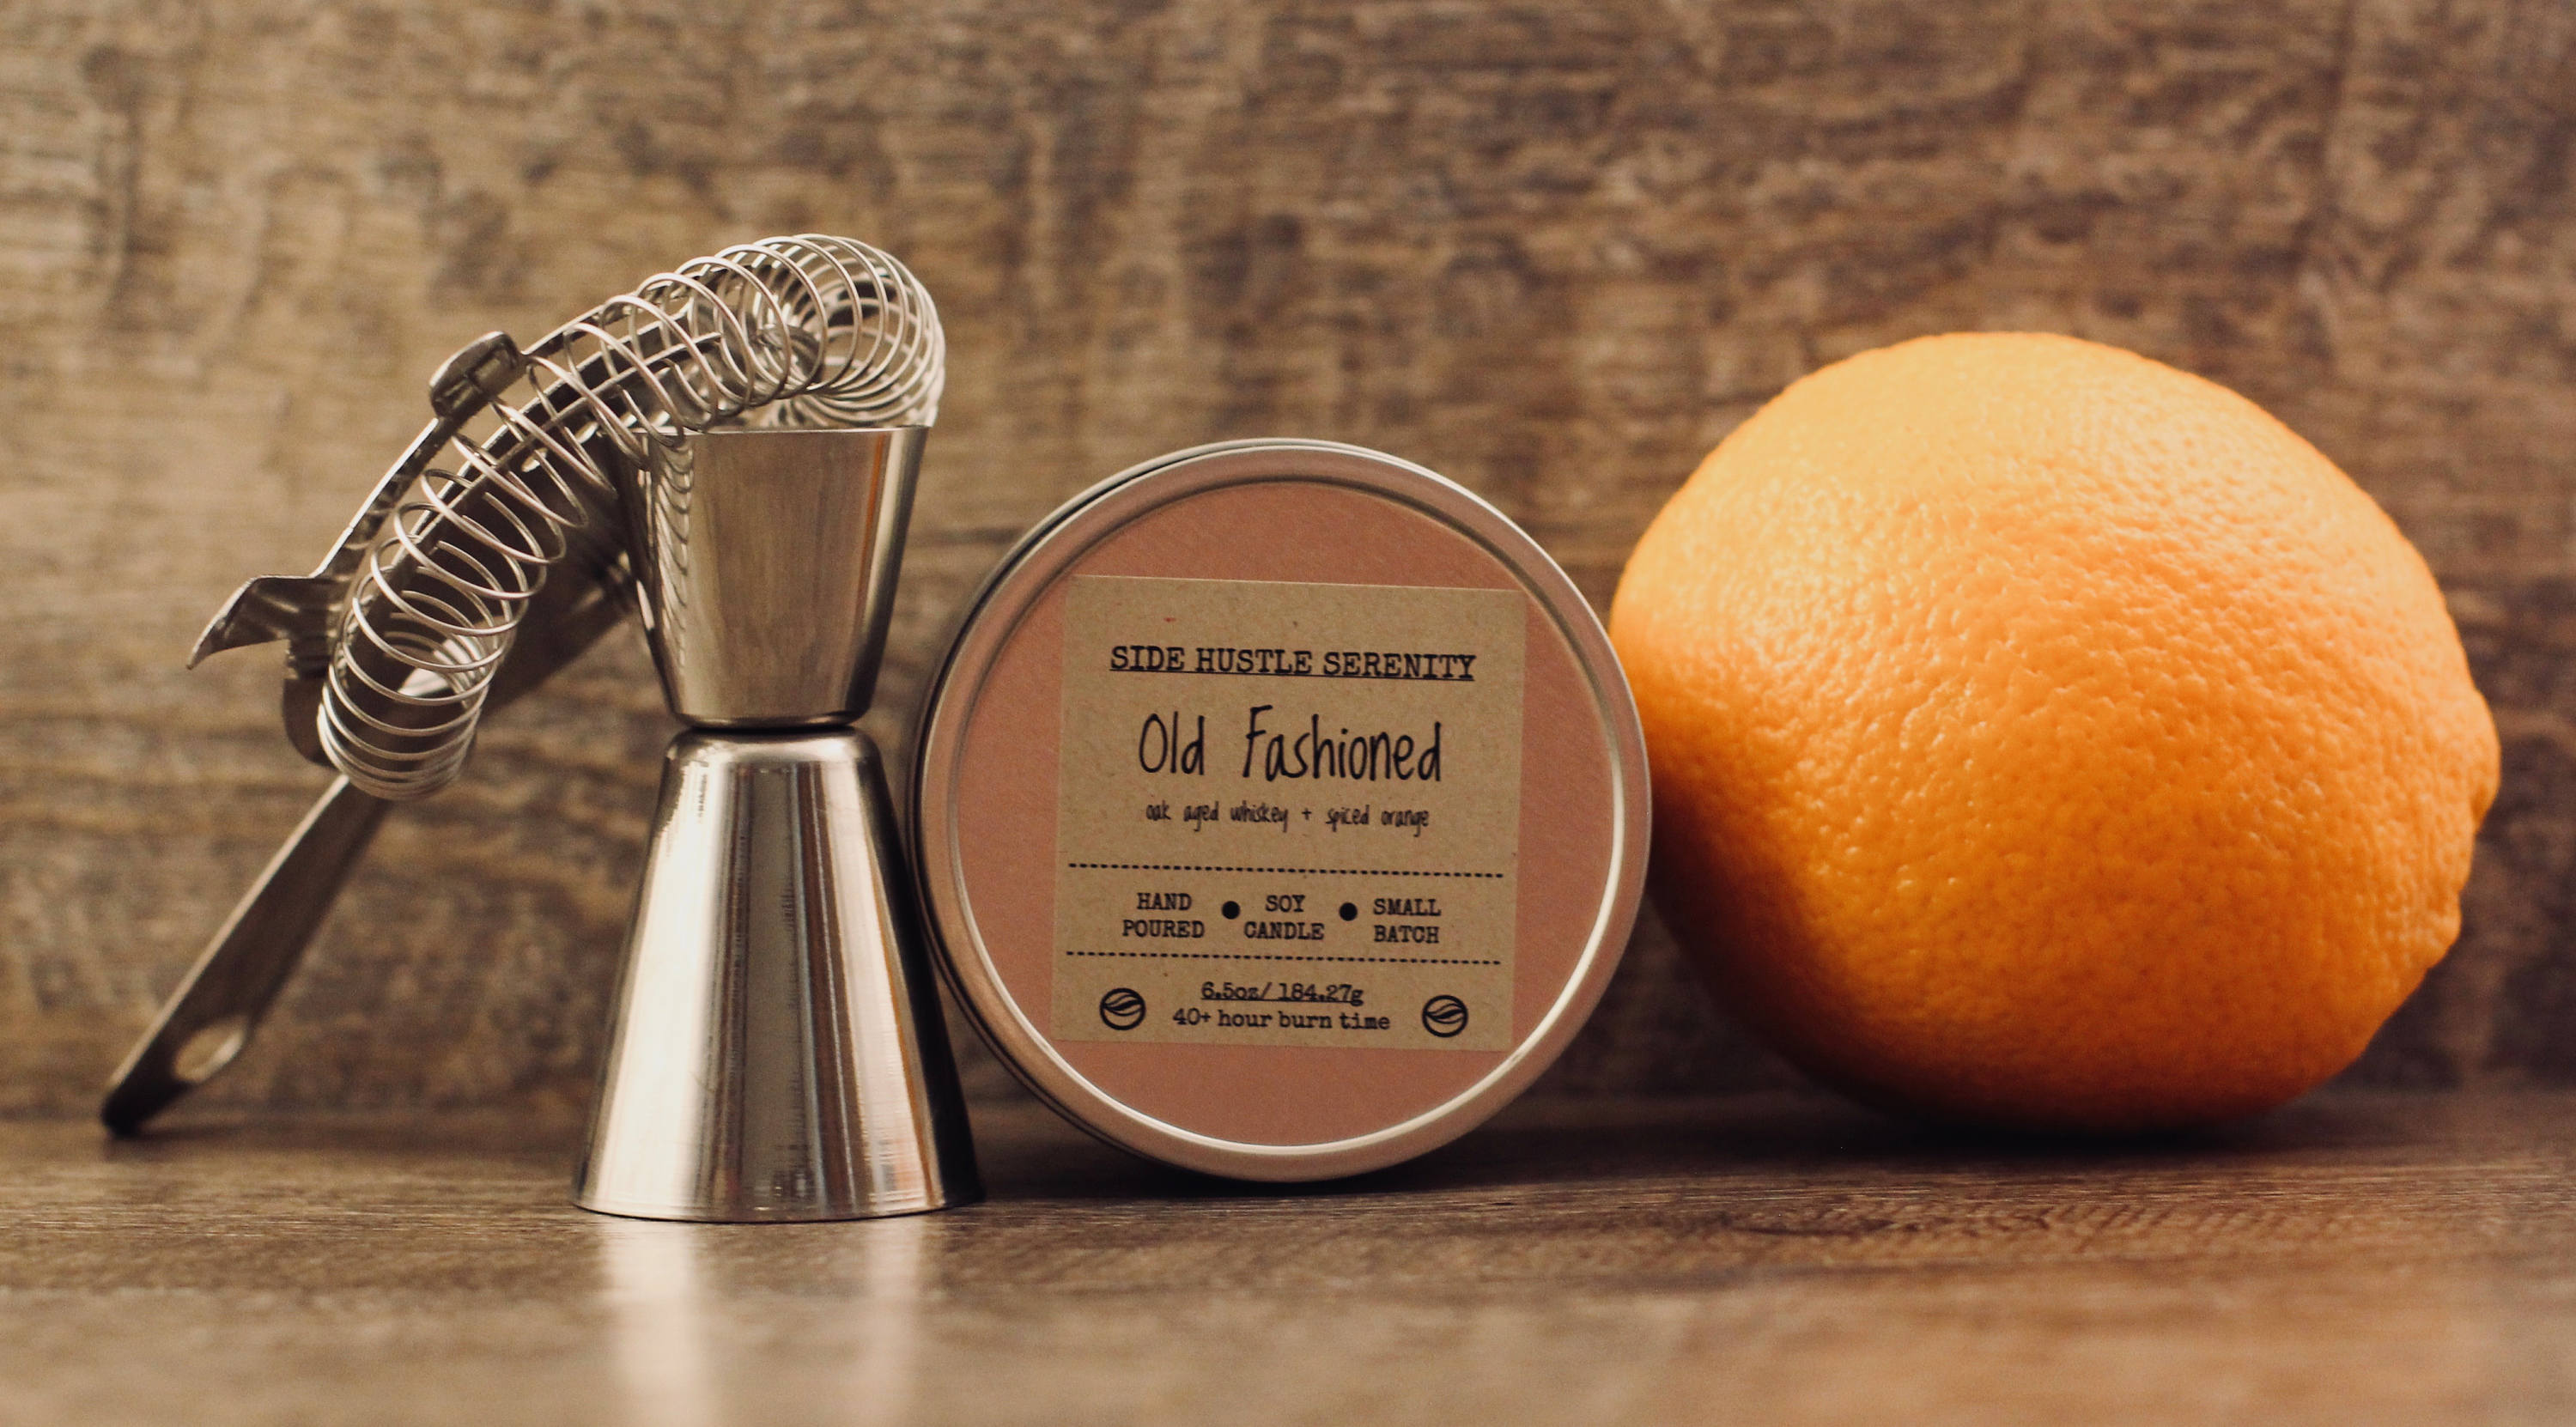 Old Fashioned Cocktail Scented Soy Candle | Oak Aged Whiskey + Spiced Orange - Side Hustle Serenity